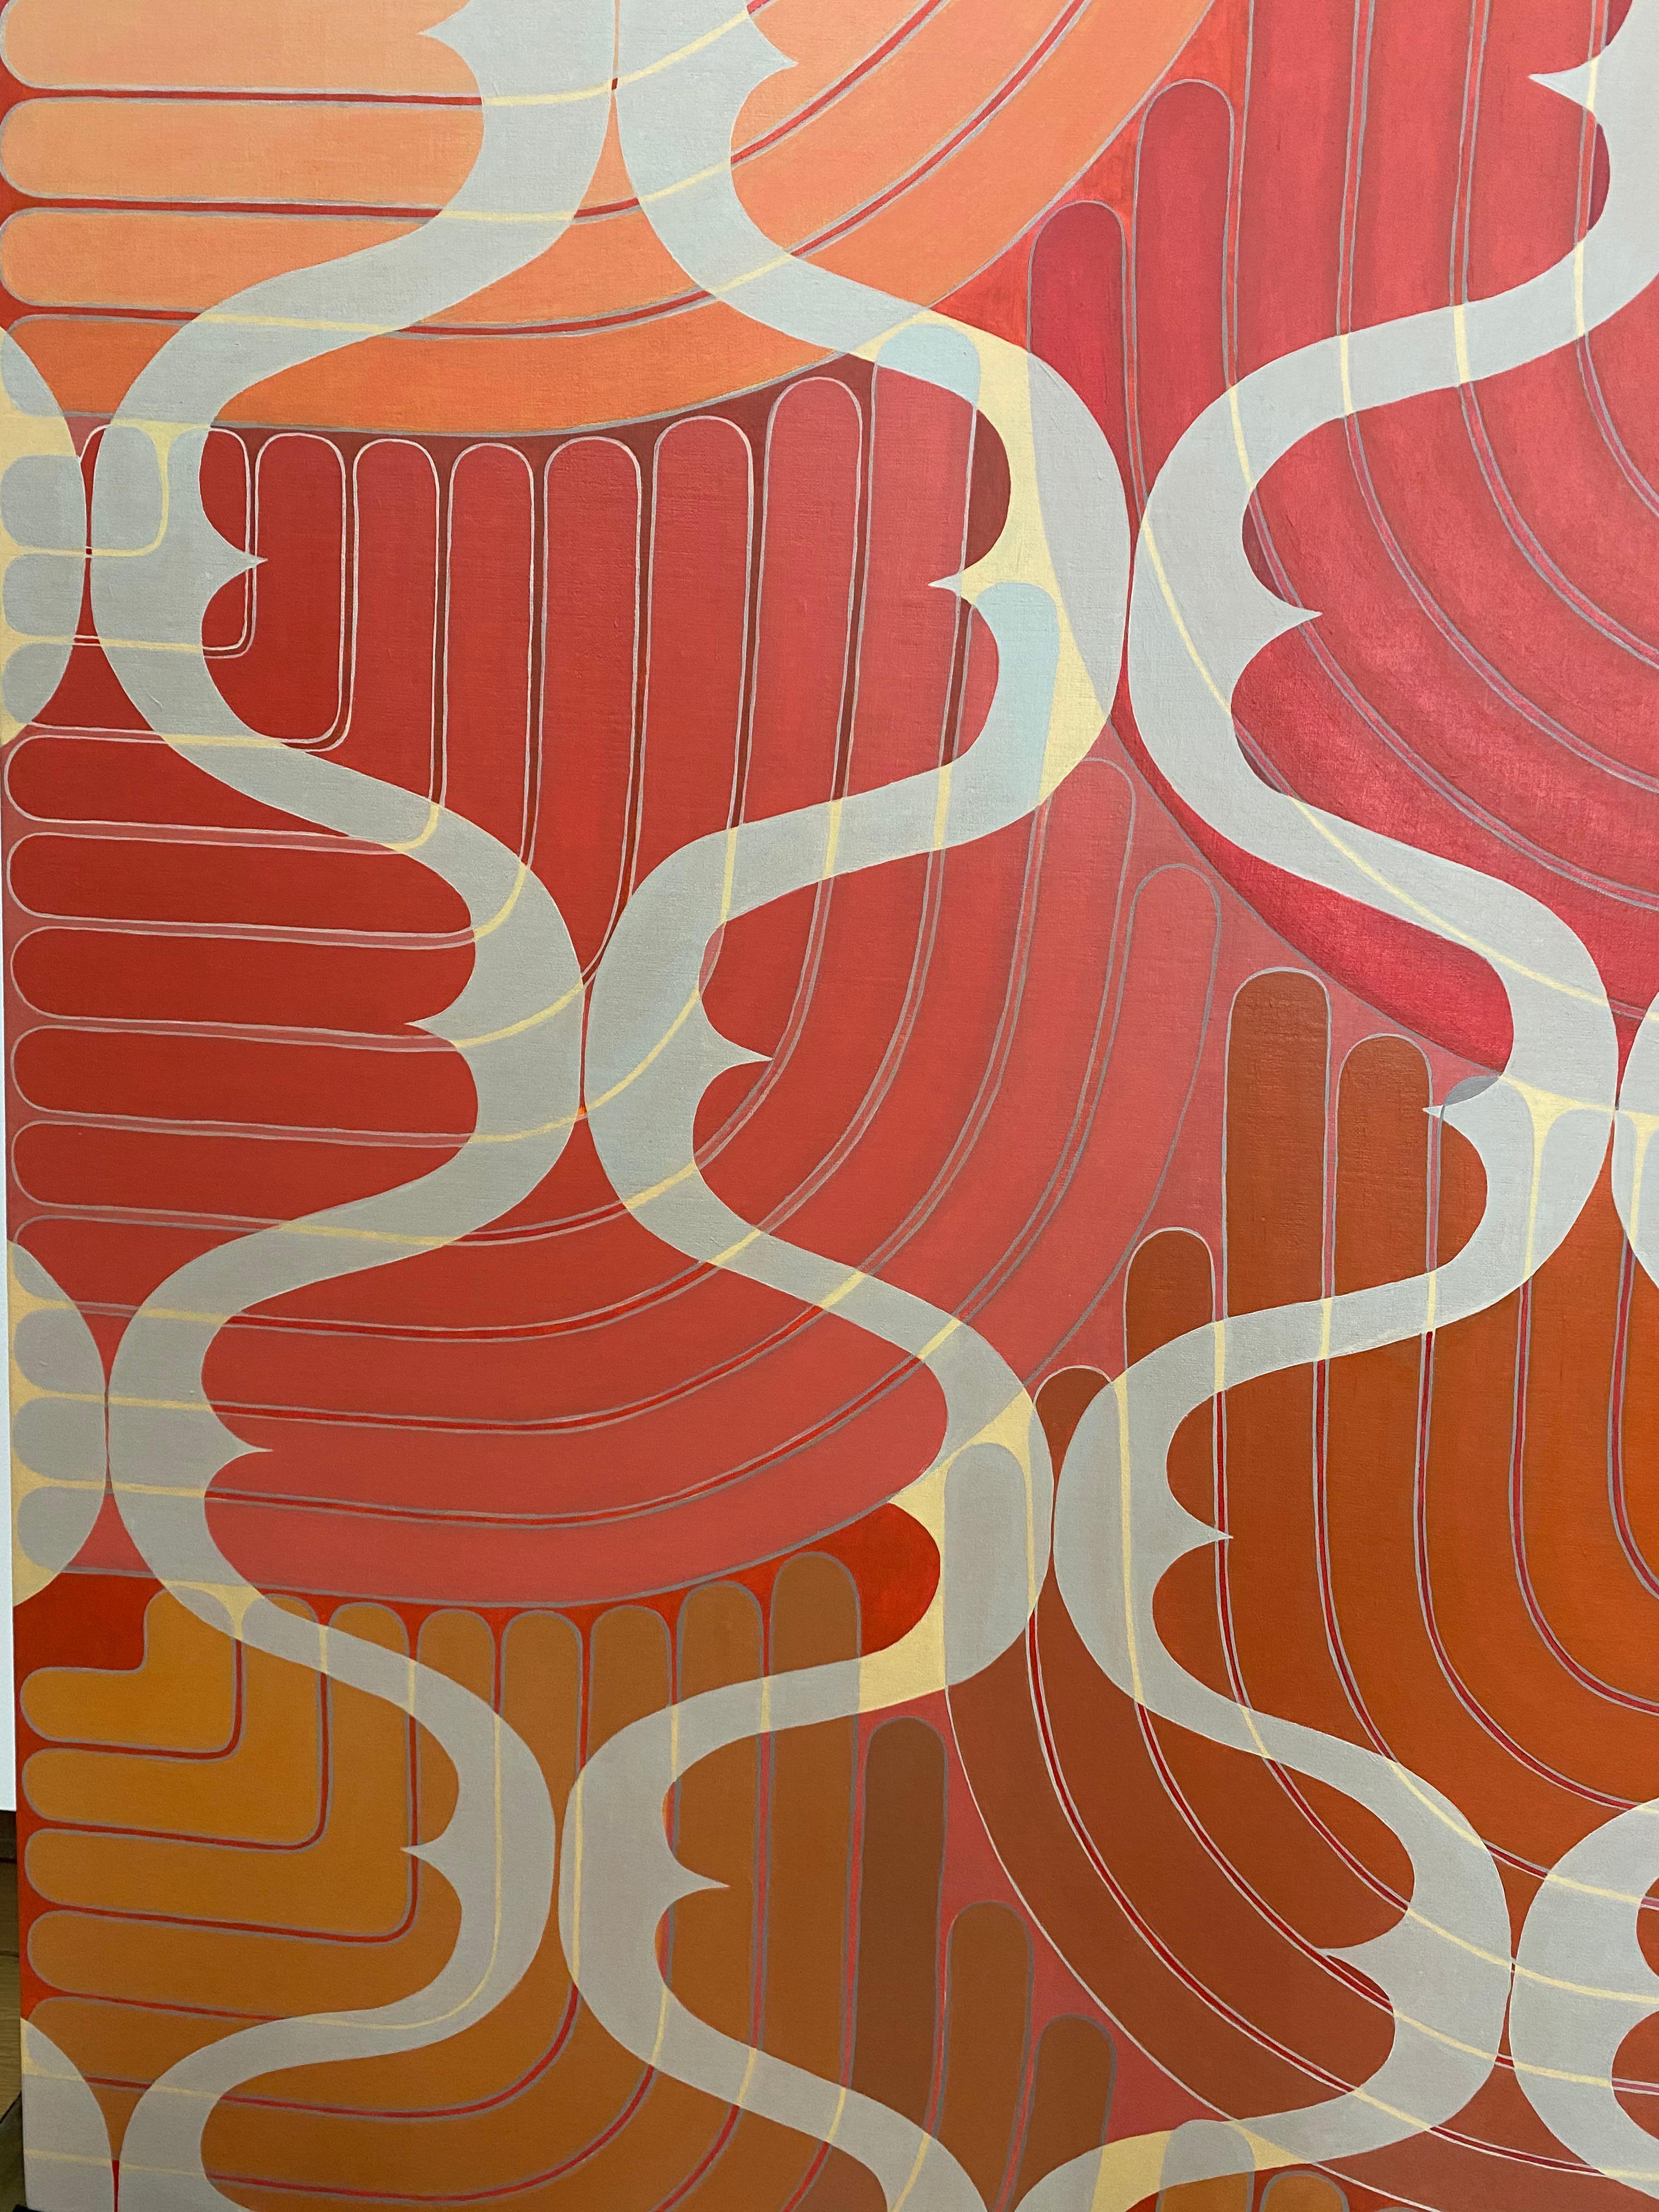 An abstract geometric pattern is composed of thick curving lines in dark pink, coral, and orange, beneath another repeating pattern in pale gray, suggesting a sense of movement within the layered forms. Signed and dated on verso.

Jenny Kemp’s